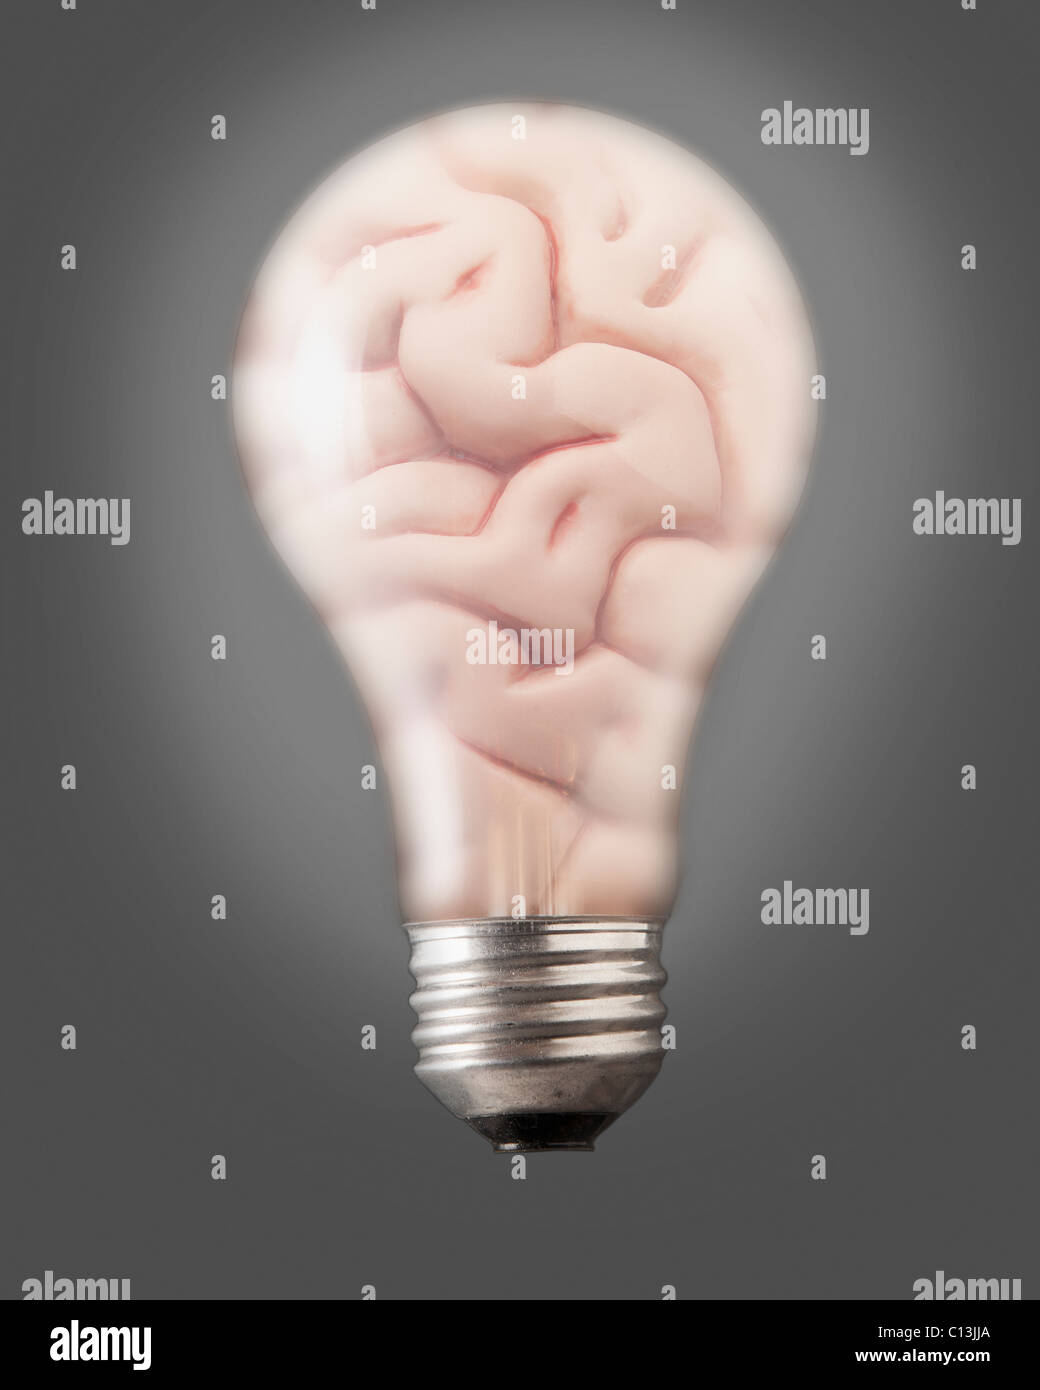 Composition of bulb and one human brain Stock Photo